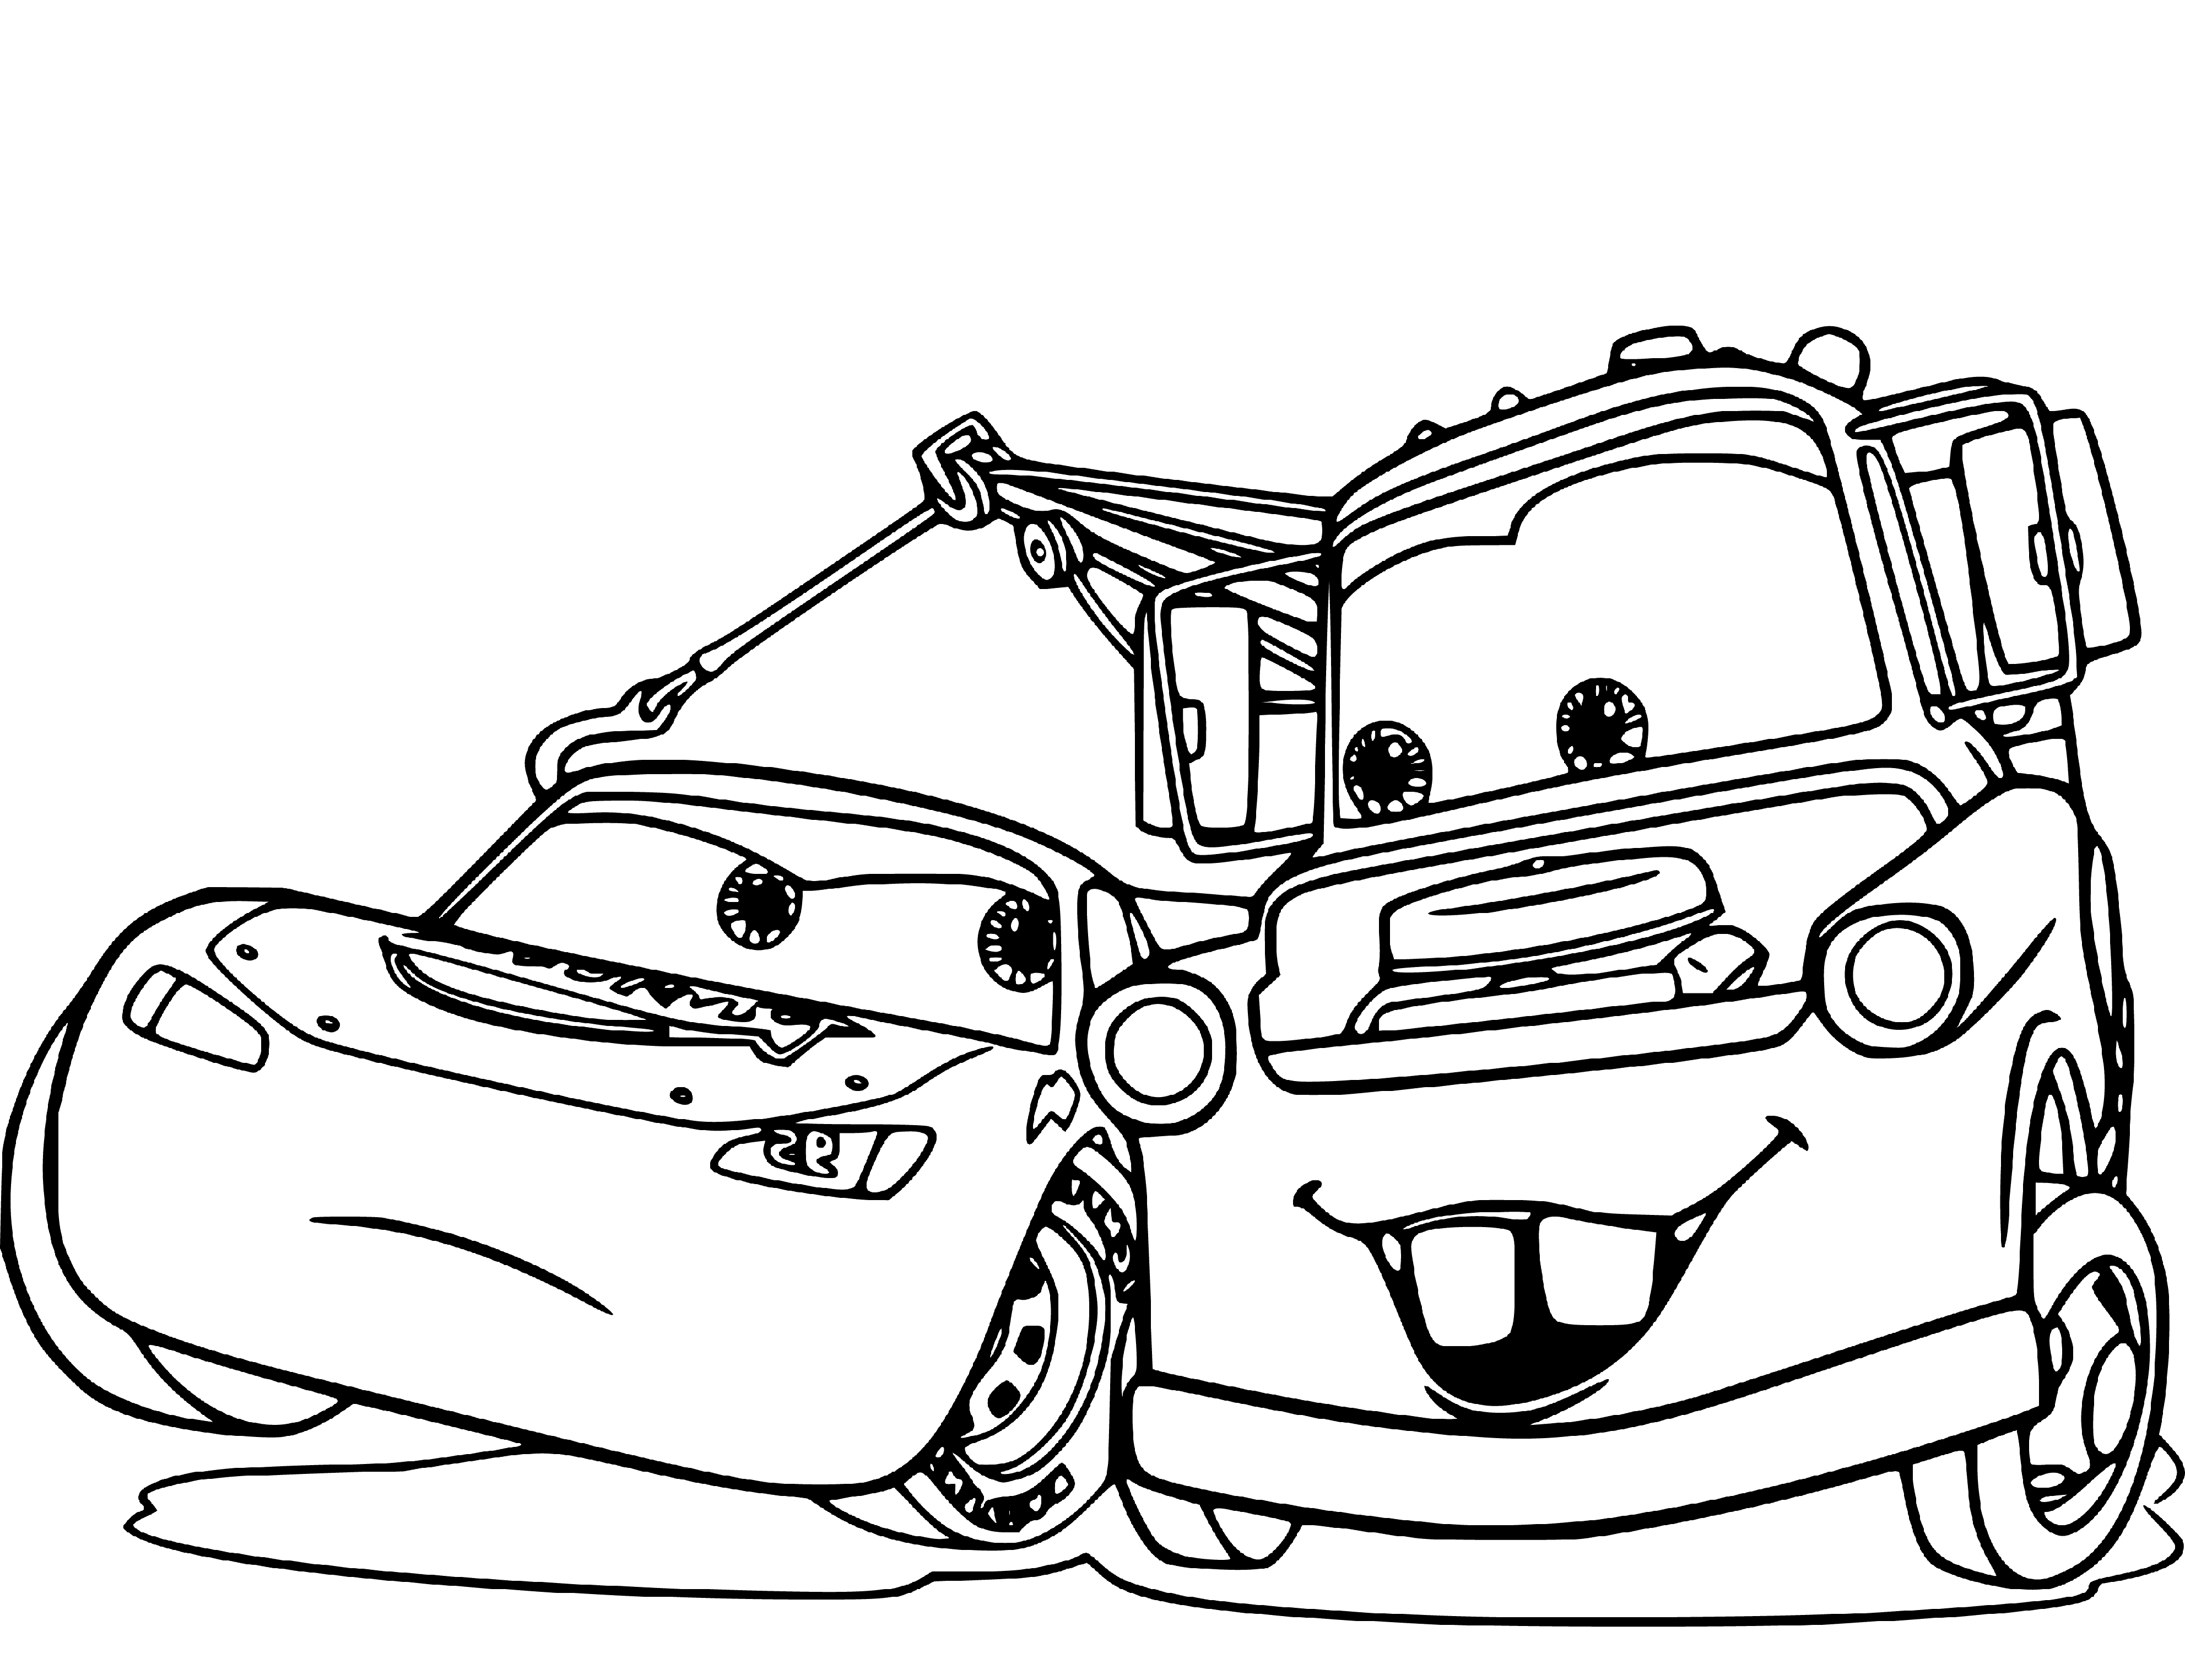 Cars on the Road Coloring Page (Lightning McQueen and Mater) - SheetalColor.com